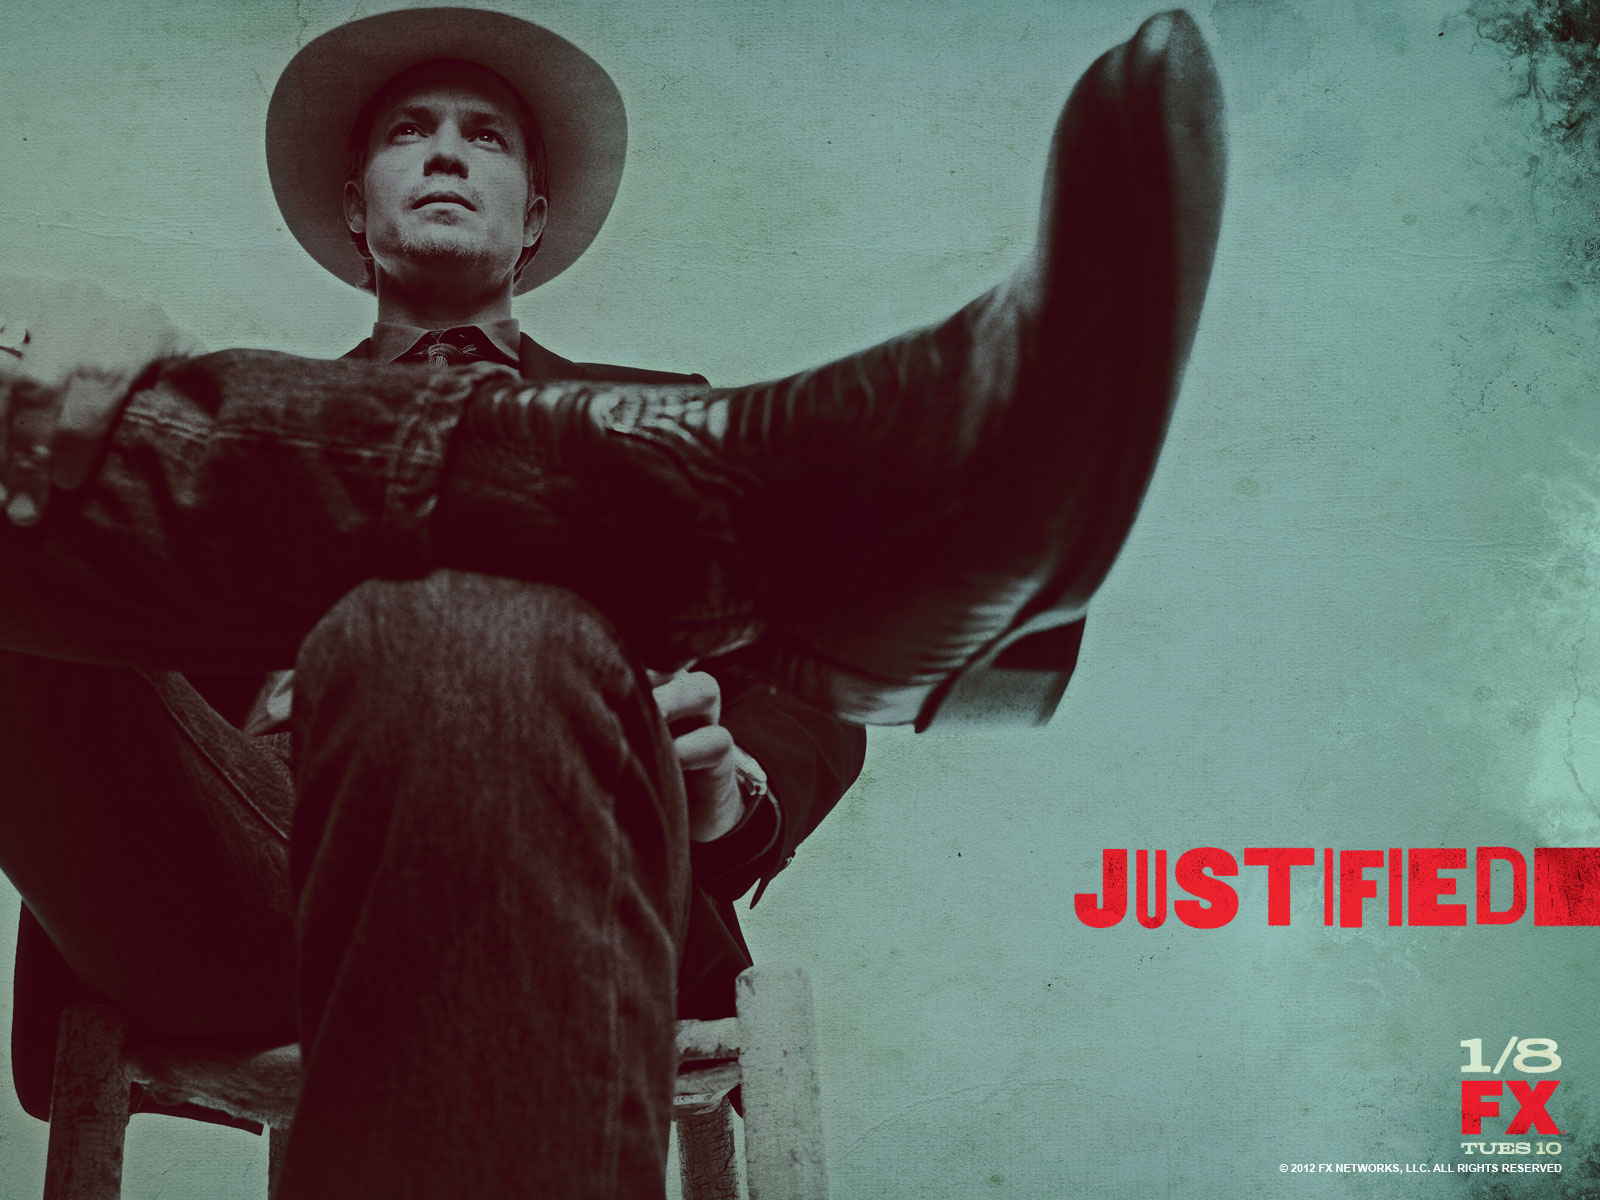 Original Size, Download Now - Justified Series Tv Poster , HD Wallpaper & Backgrounds